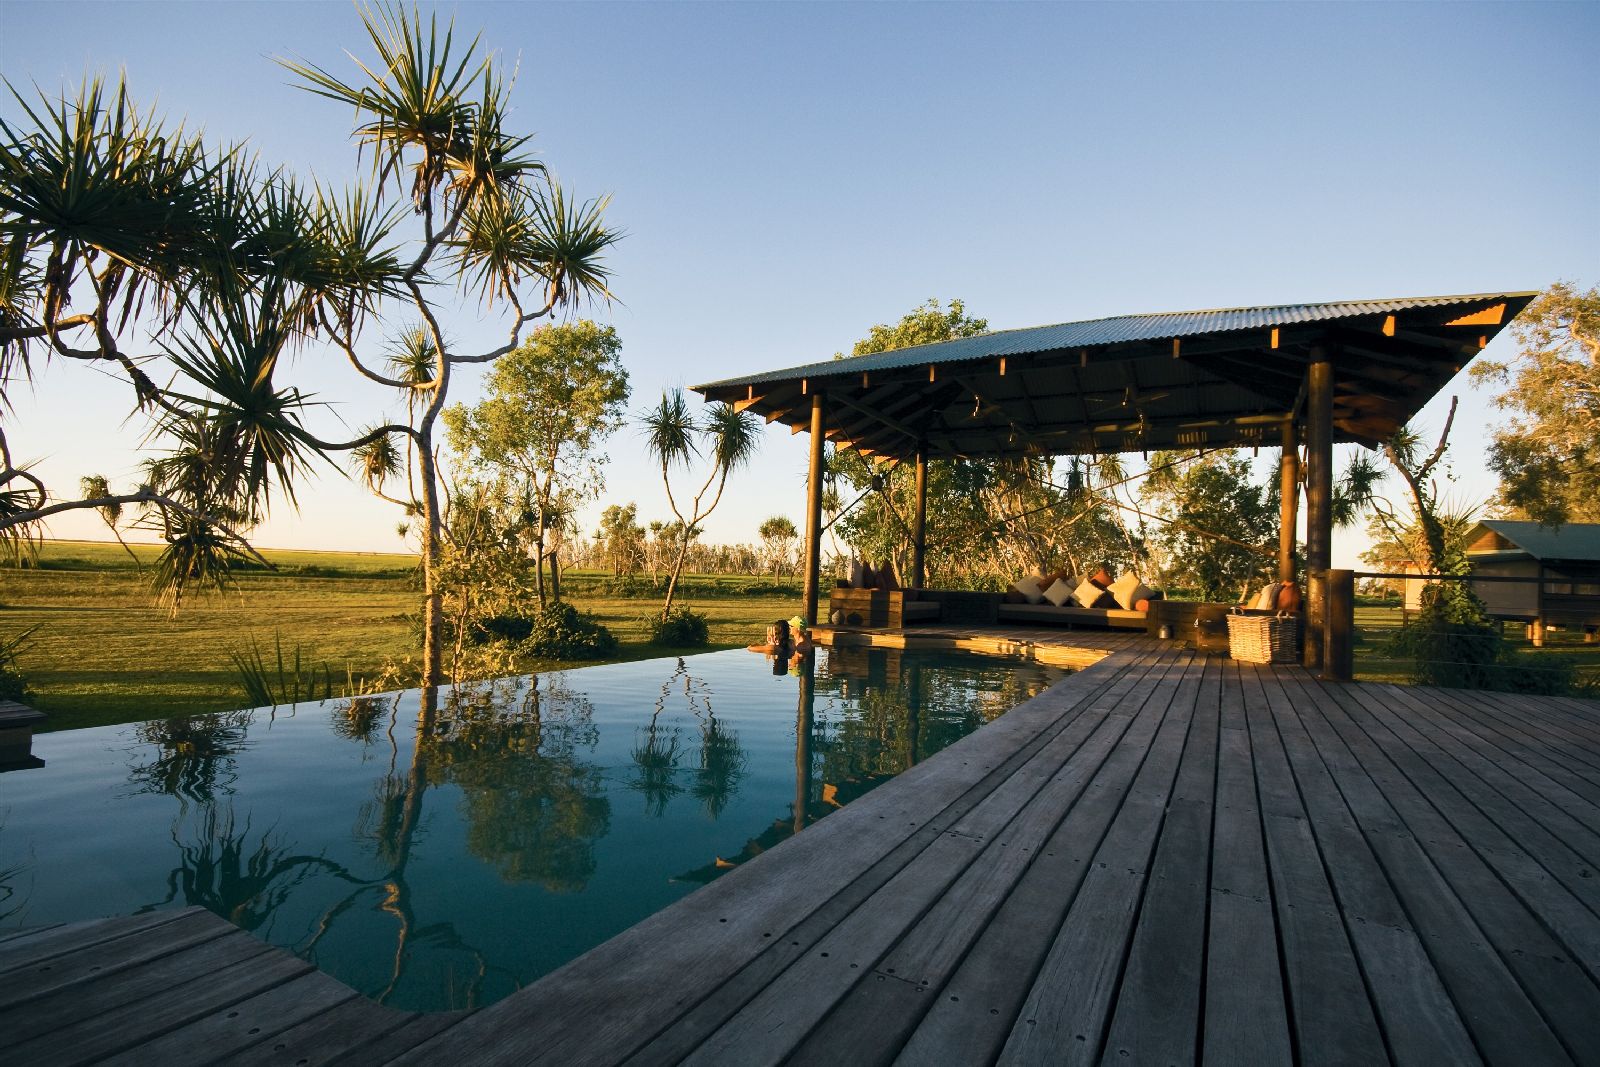 The swimming pool at Bamurru Plains in Northern Australia's Top End